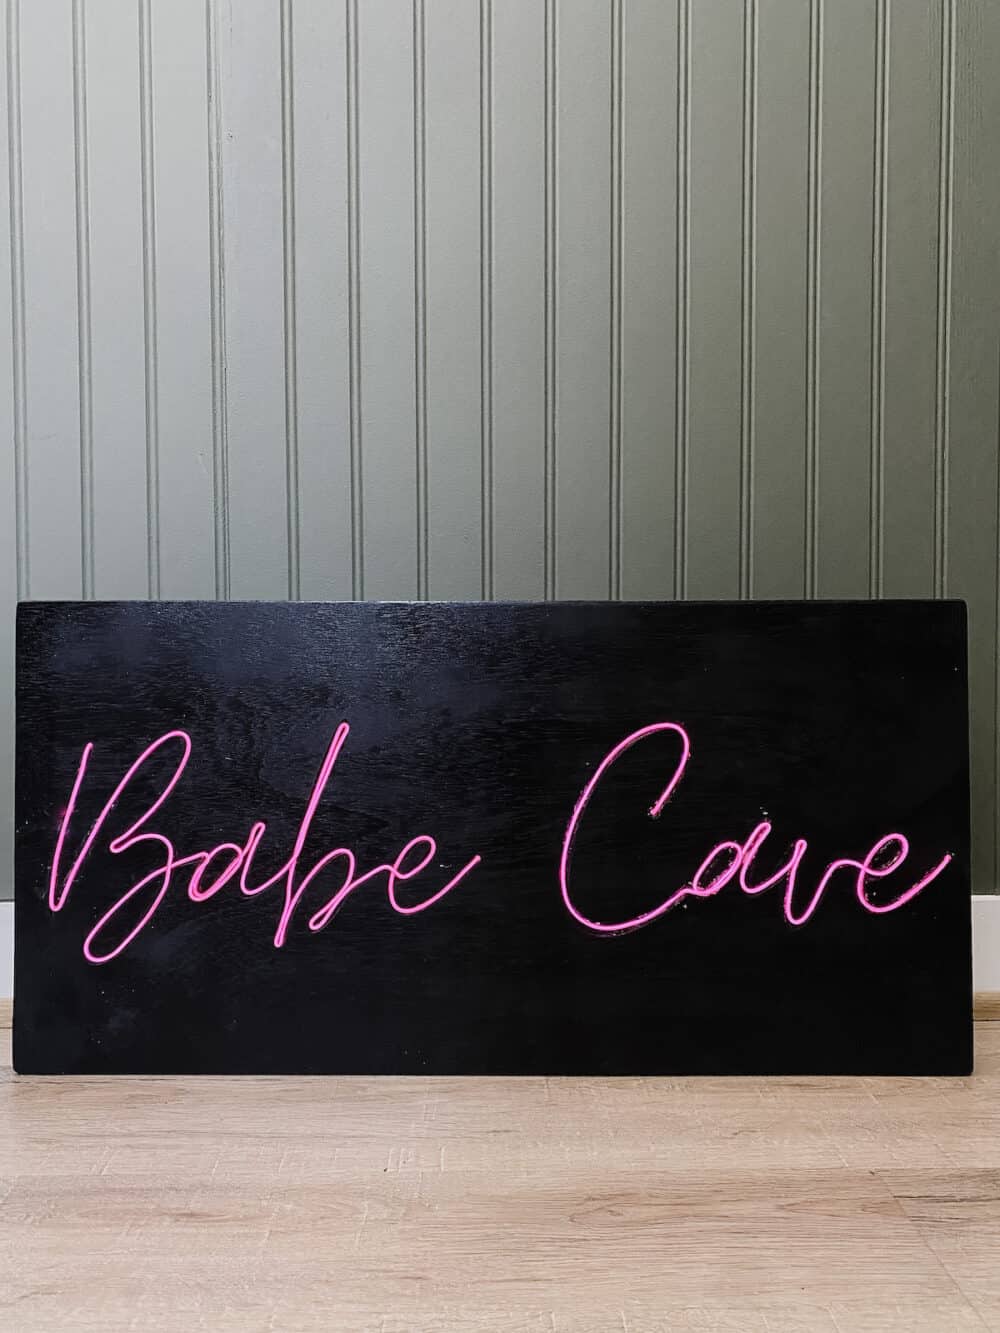 close up image of DIY neon sign that states "babe cave" in pink neon